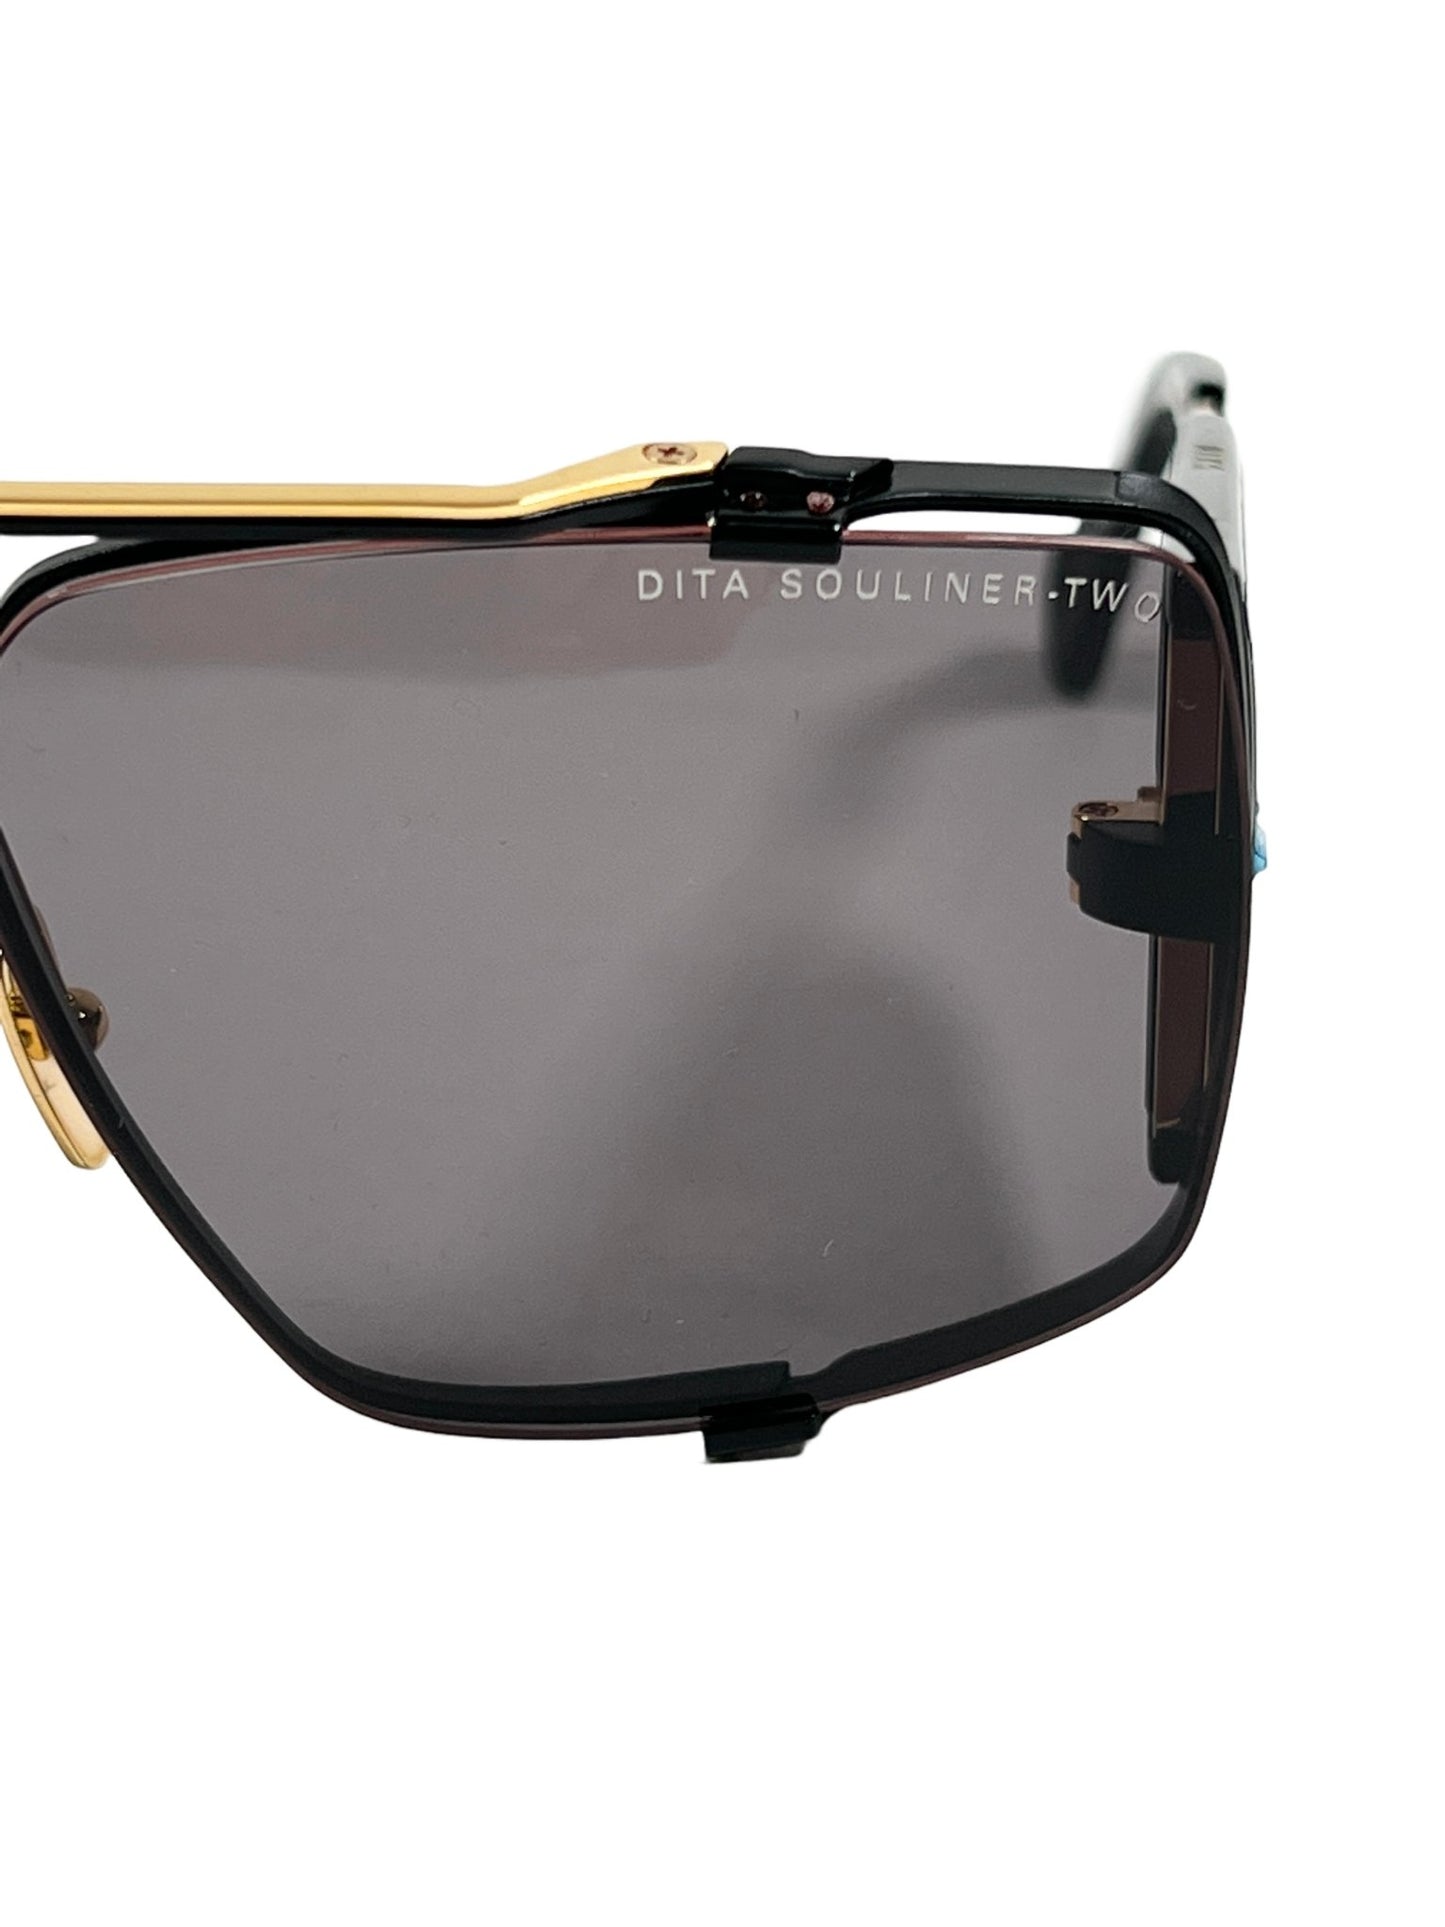 A pair of DITA SOULINER-TWO DTS136-64-03 sunglasses with a matte black frame and gold trim.